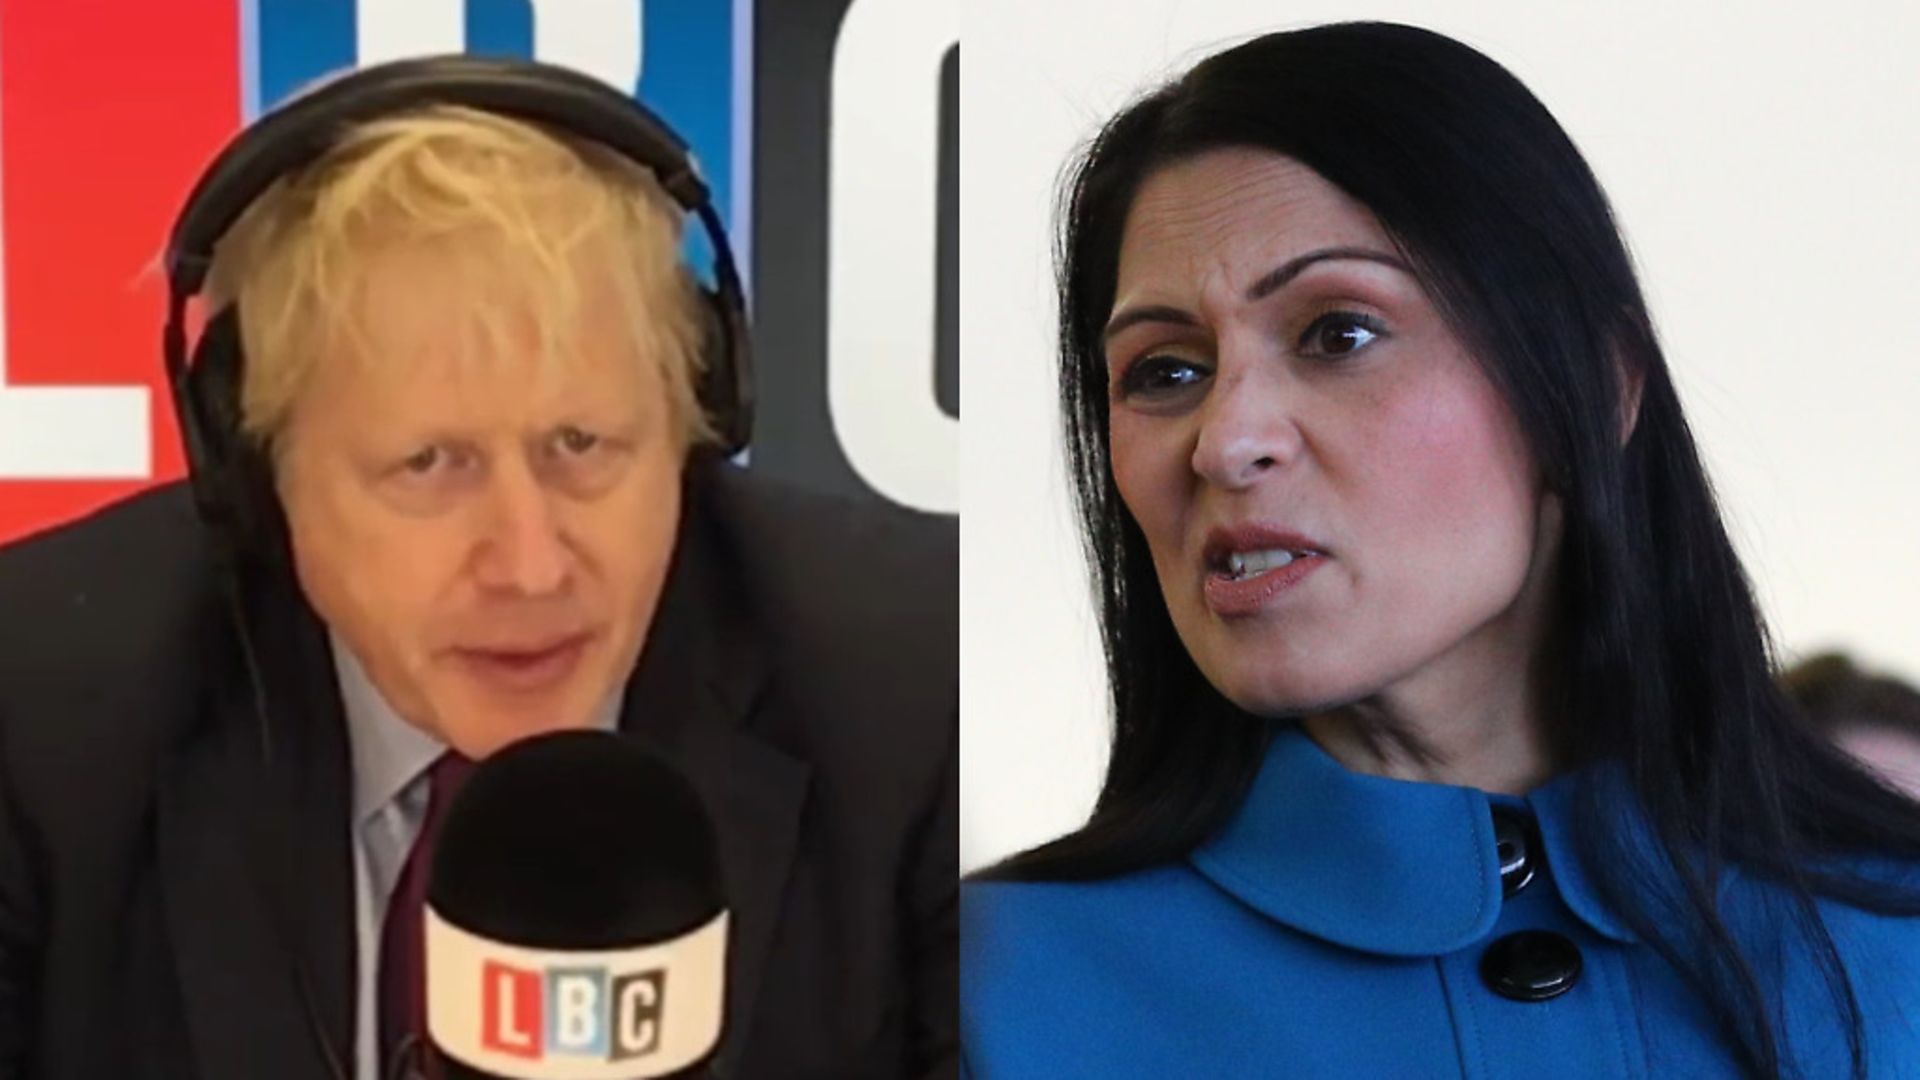 Boris Johnson couldn't back up Priti Patel's alarming 'crime wave' claims in the event of a Labour government. Picture: LBC / Aaron Chown/PA - Credit: LBC / Aaron Chown/PA